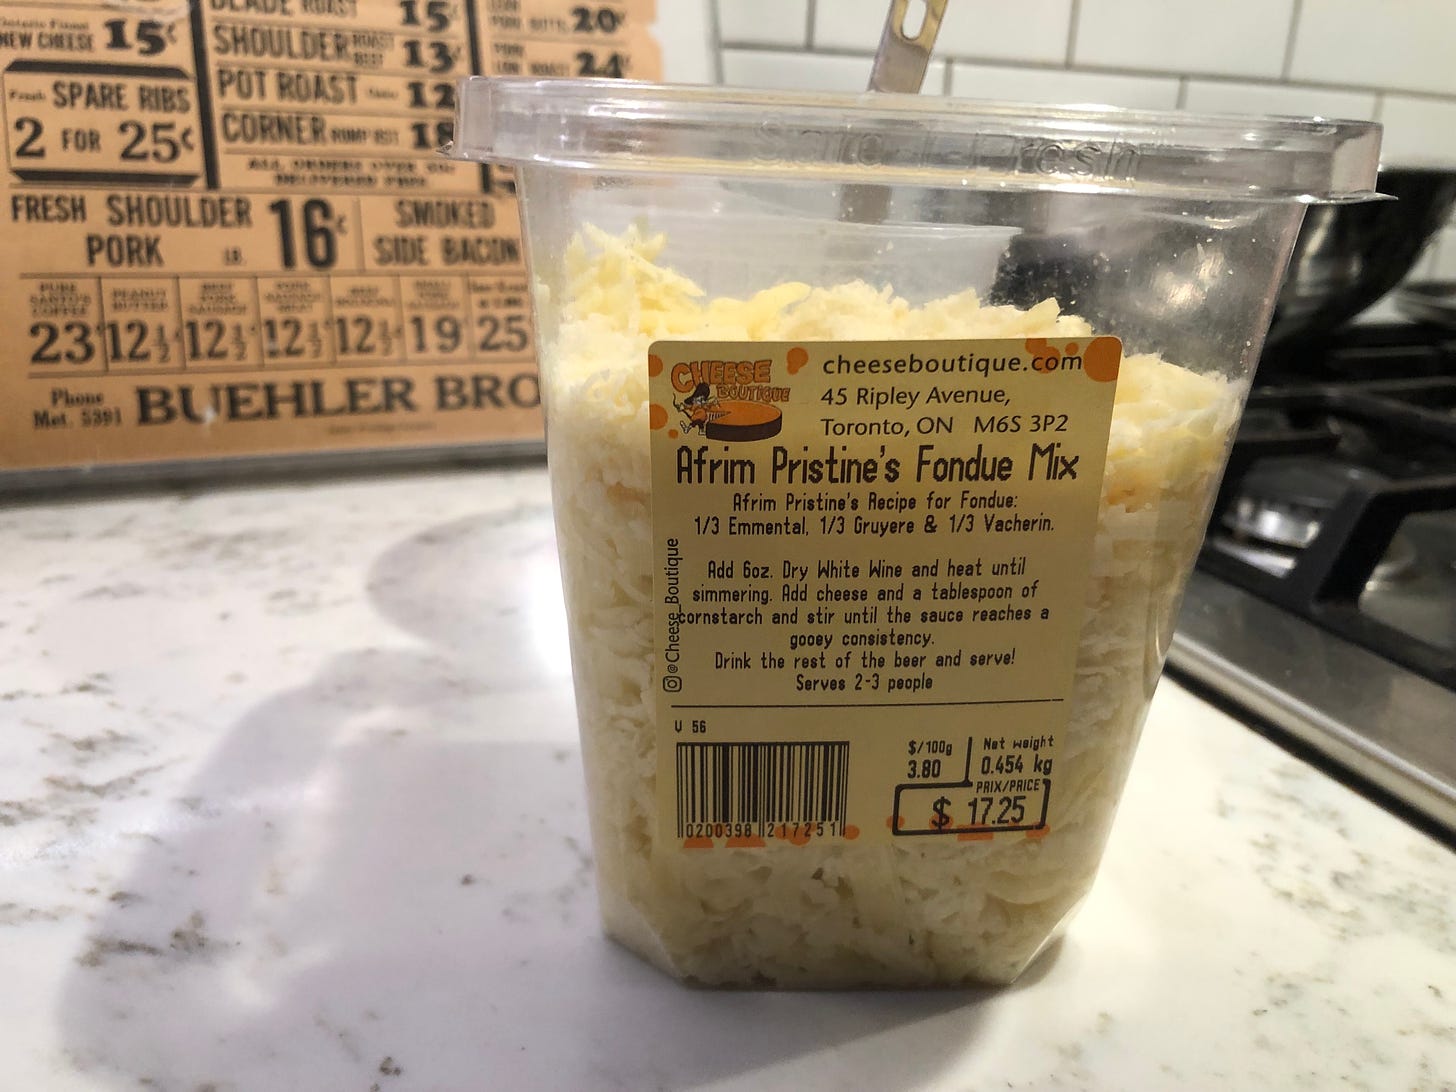 A container of shredded cheese from Cheese Boutique on a kitchen counter. The label reads, "Afrim Pristine's Fondue Mix - Afrim Pristine's Recipe for Fondue: 1/3 Emmenthal, 1/3 Gruyere & 1/3 Vacherin. Add 6oz. Dry White Wine and heat until simmering. Add cheese and a tablespoon of cornstarch and stir until the sauce reaches a gooey consinstency. Drink the rest of the beer (sic) and serve! Serves 2-3 people. 